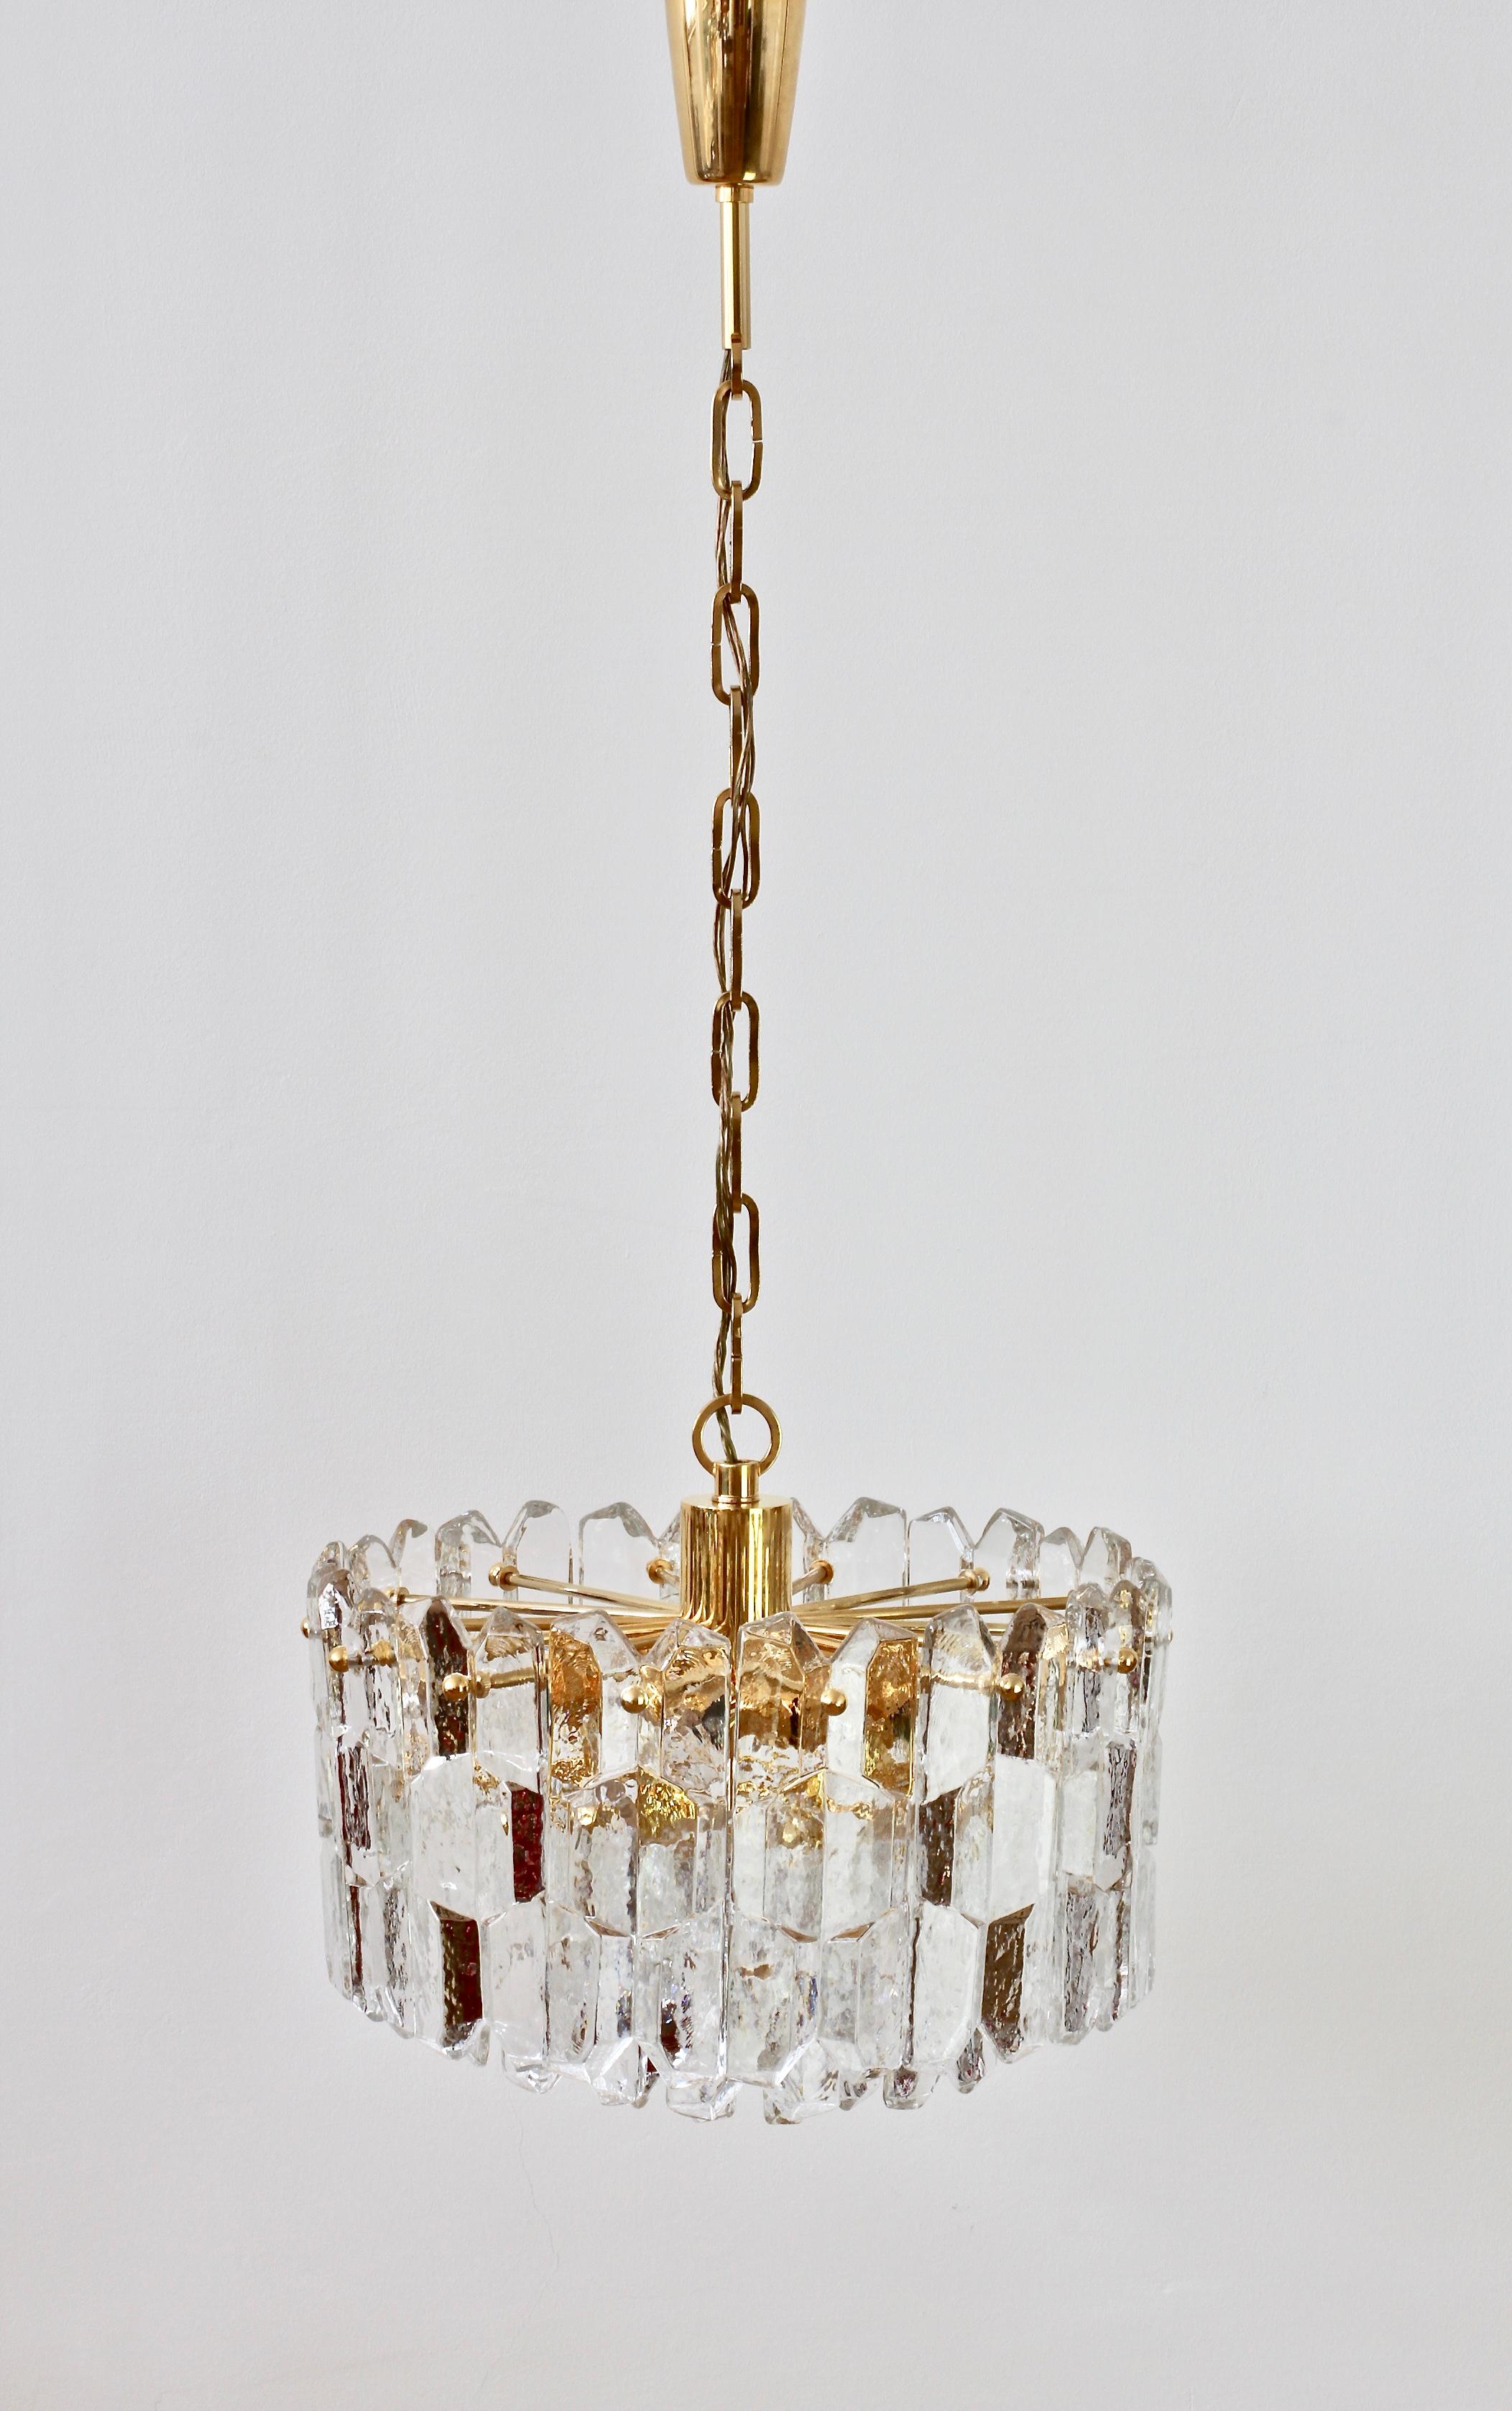 Mid-Century Modern, vintage, Austrian made 'Palazzo' ice crystal glass chandelier by Kalmar, circa 1970. Featuring twenty-six hanging glass elements resembling melting ice crystals suspended from a 24-karat gold plated brass hardware.

This